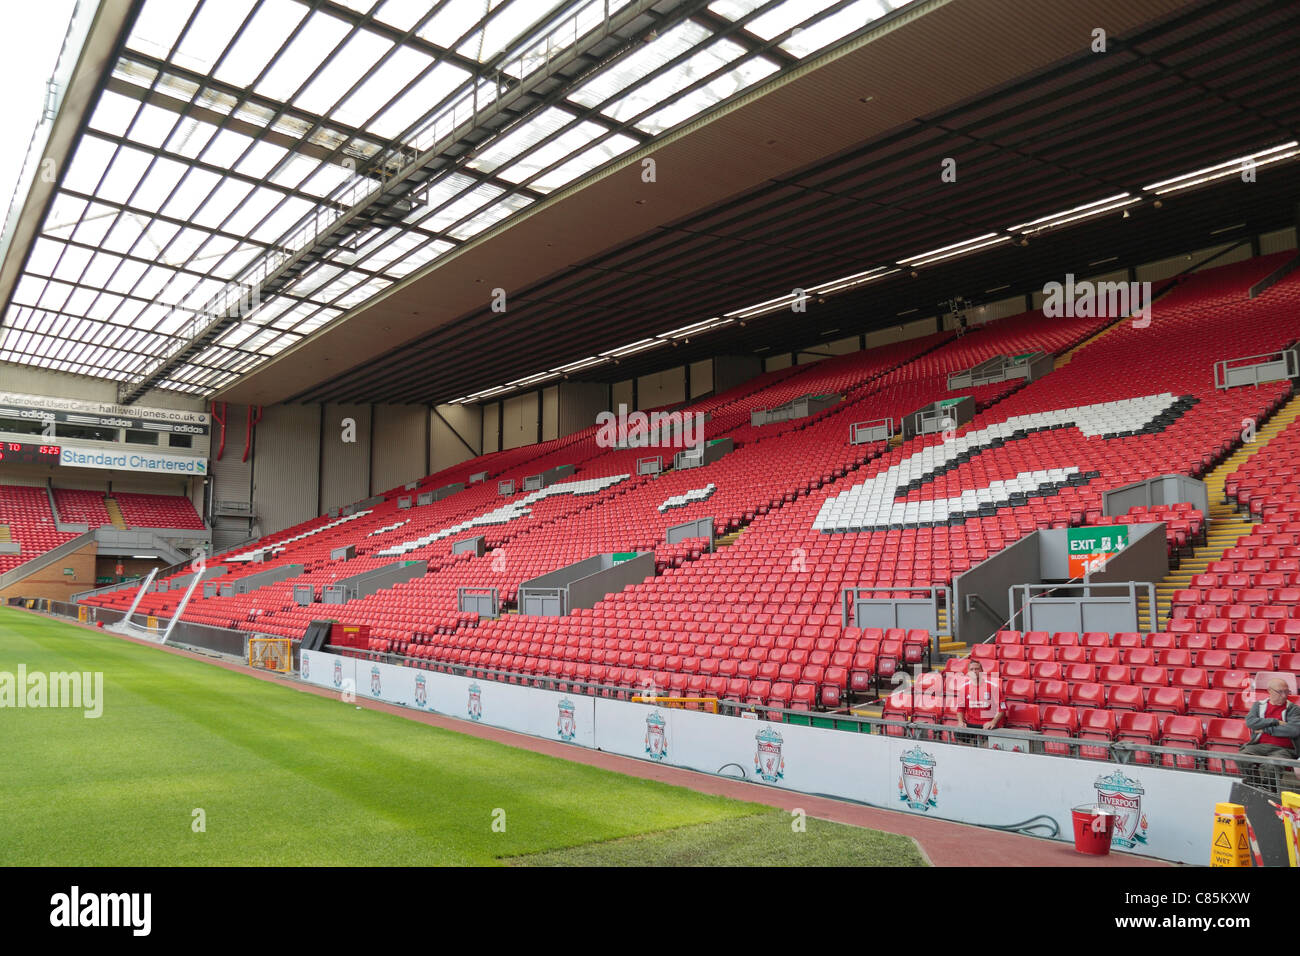 Getalenteerd telescoop tweeling Close up view of the Kop end of Anfield, the home ground of the Premier  League Liverpool Football club Stock Photo - Alamy